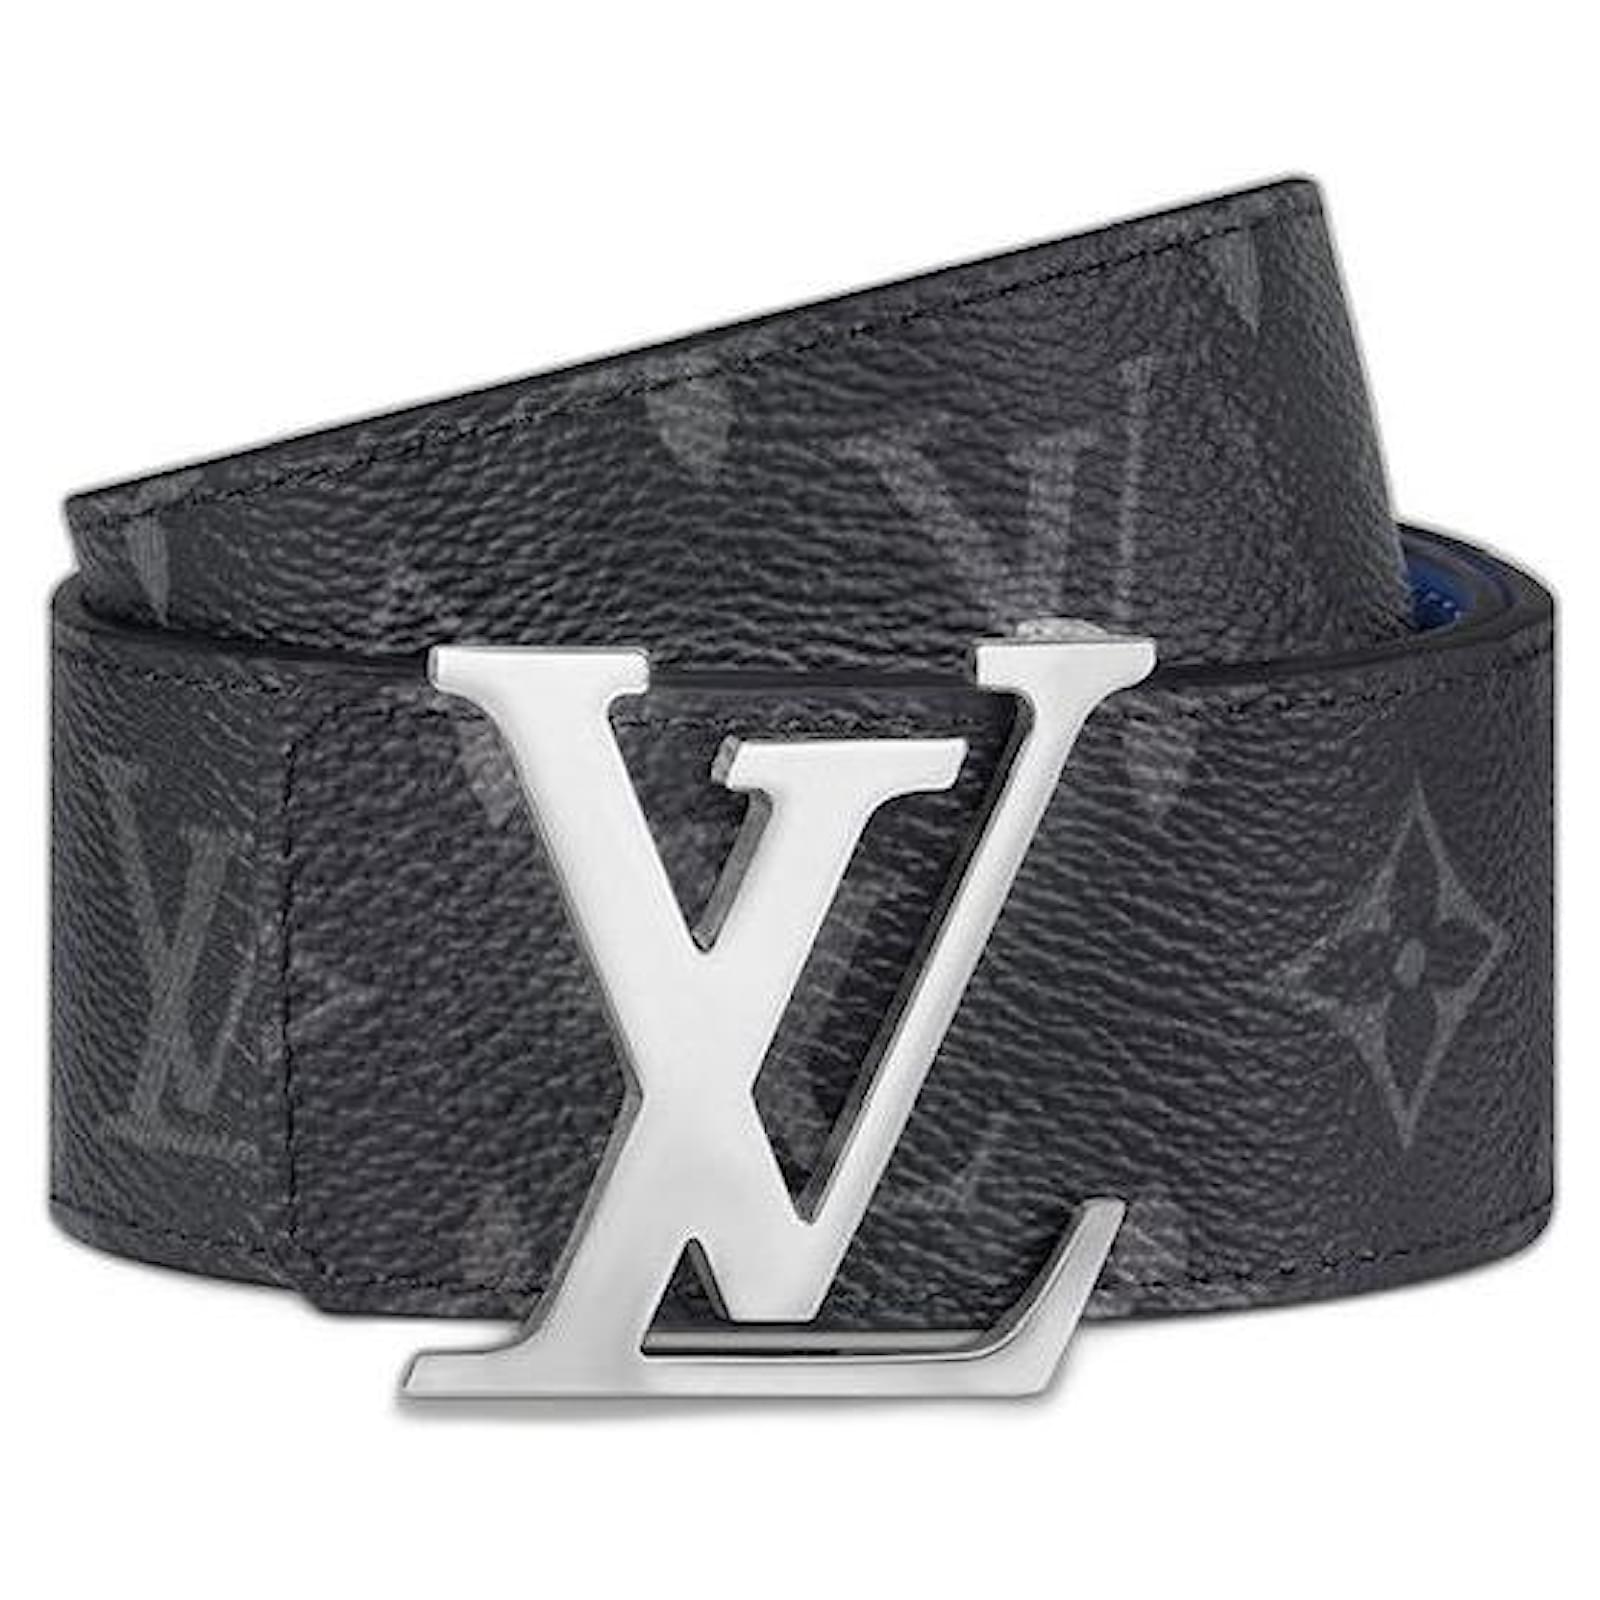 Louis Vuitton Belt For Sale In Victorville, Ca